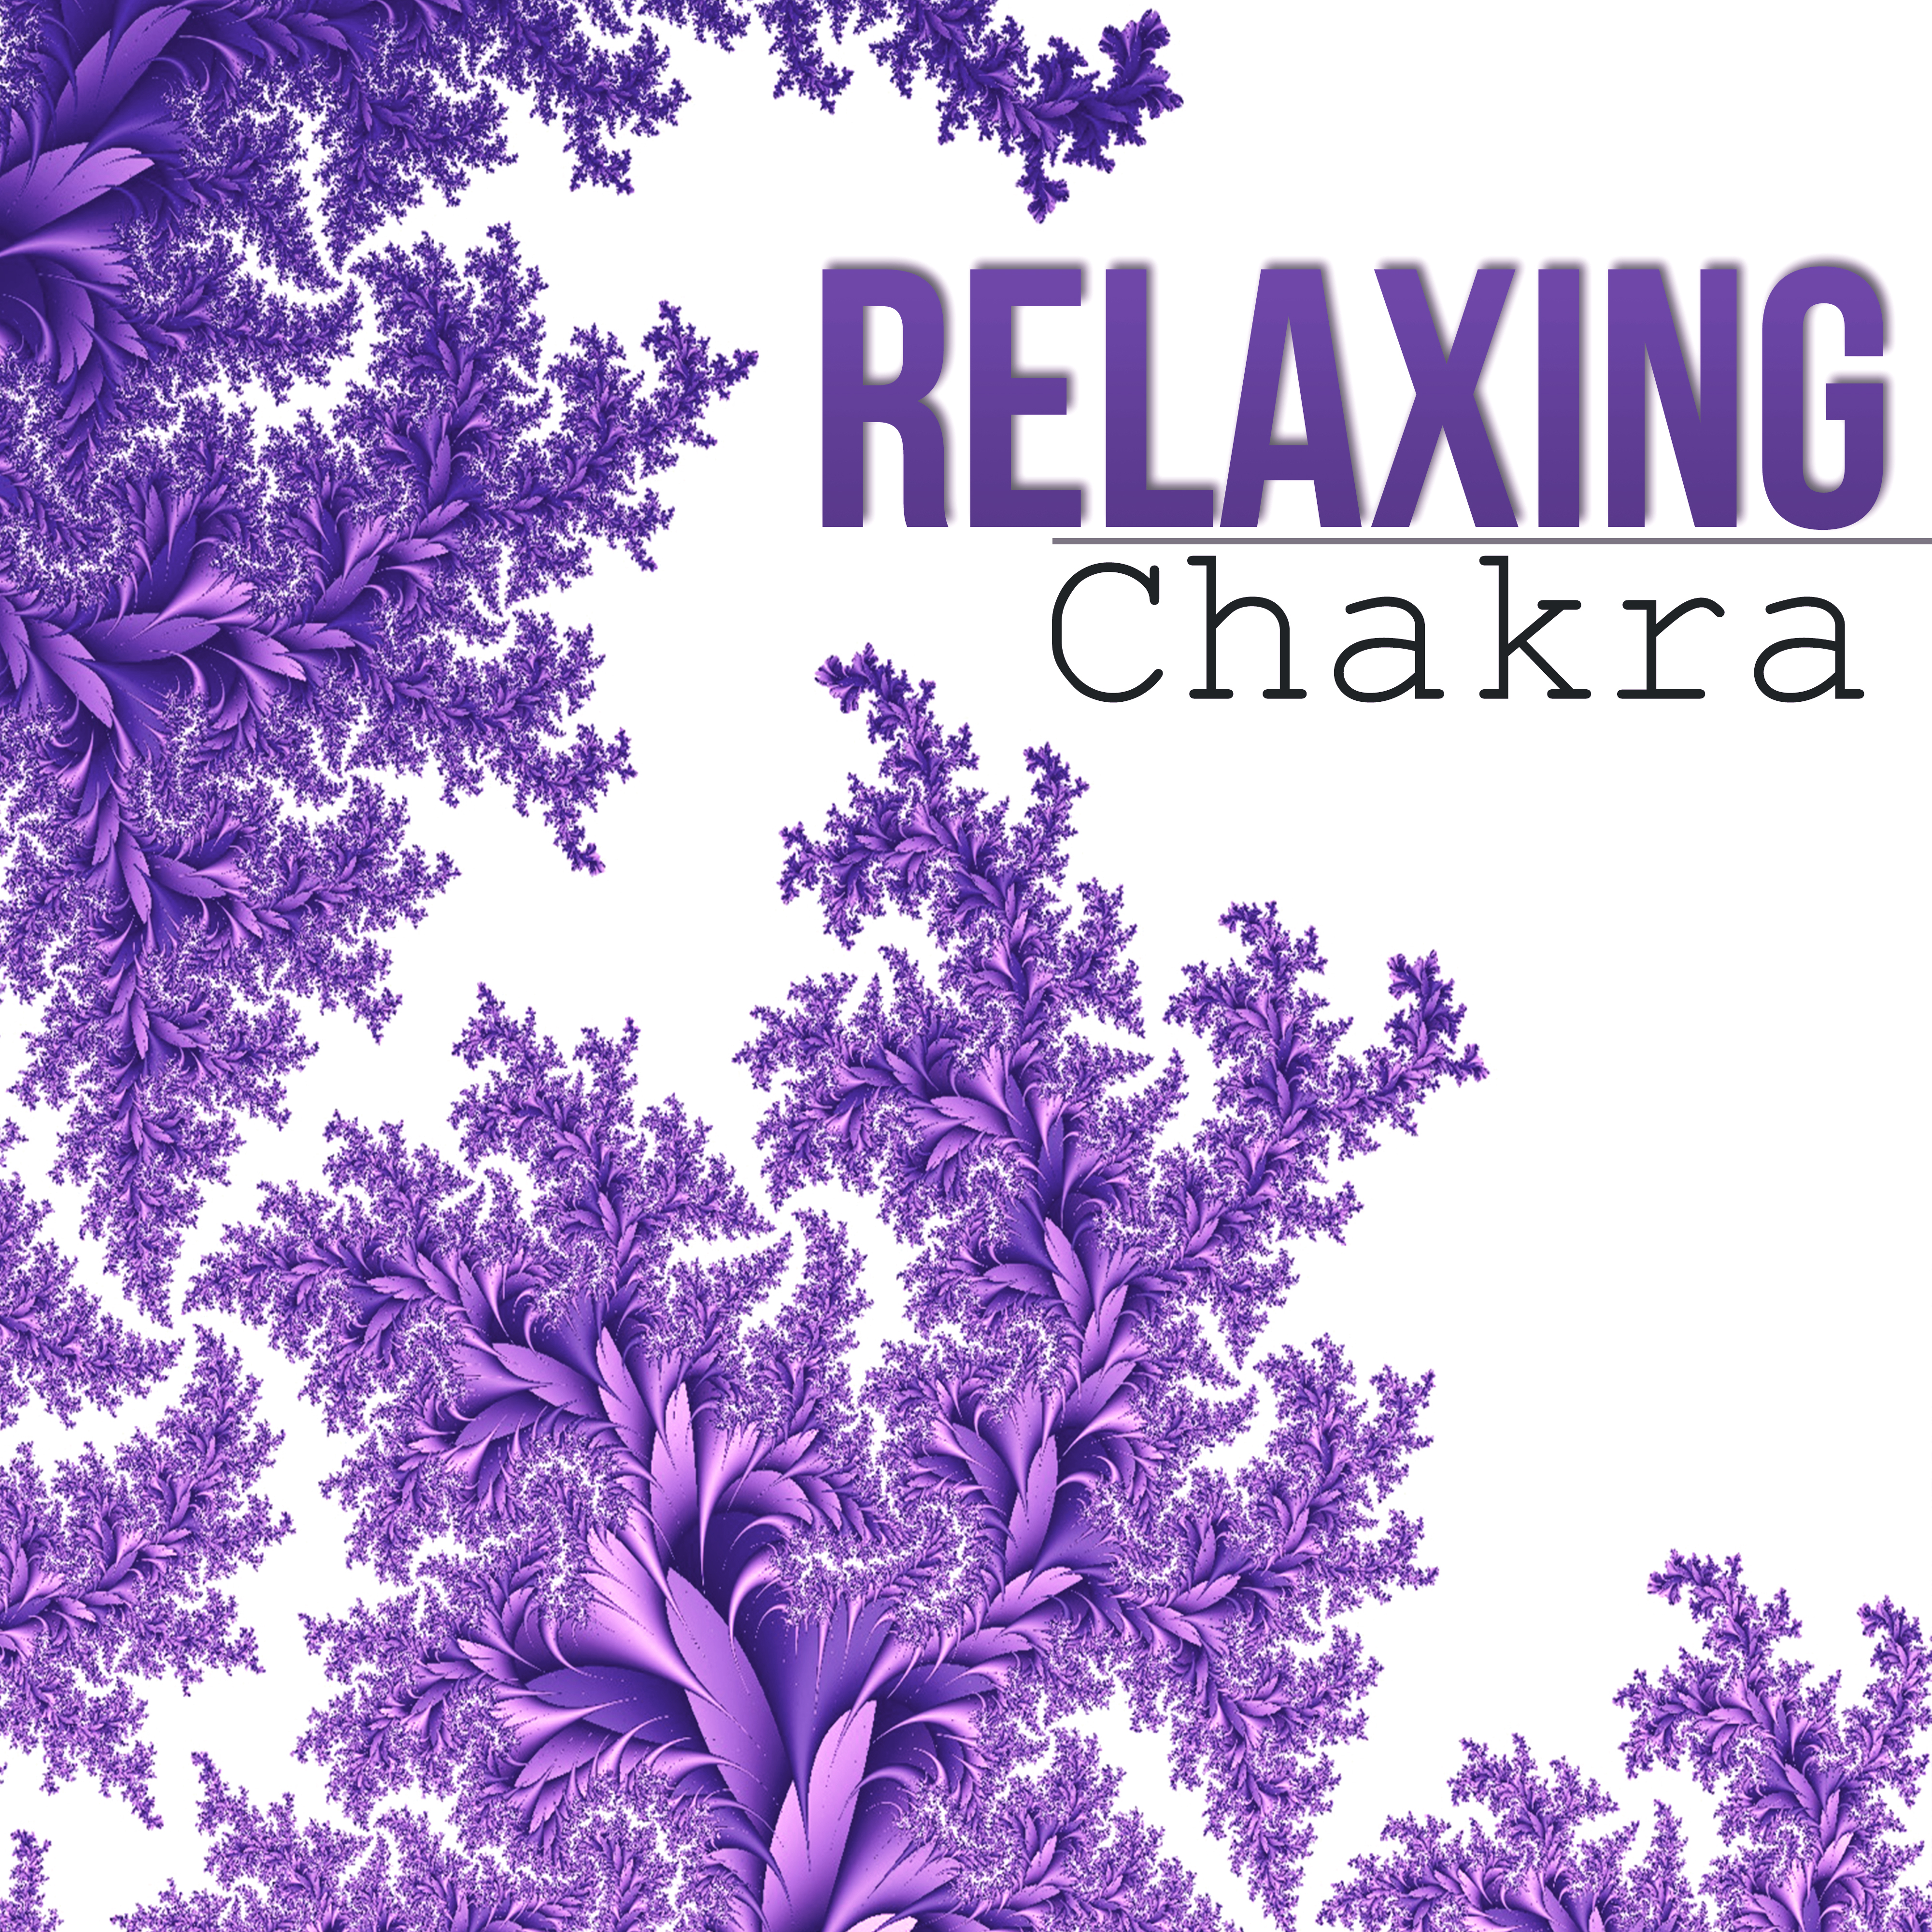 Relaxing Chakra - Sound Healing Meditation Music Therapy for Relaxation, Pure Yoga with Background Music Ocean, Nature Sounds, Inner Balance, Restful Sleep, Spiritual Healing